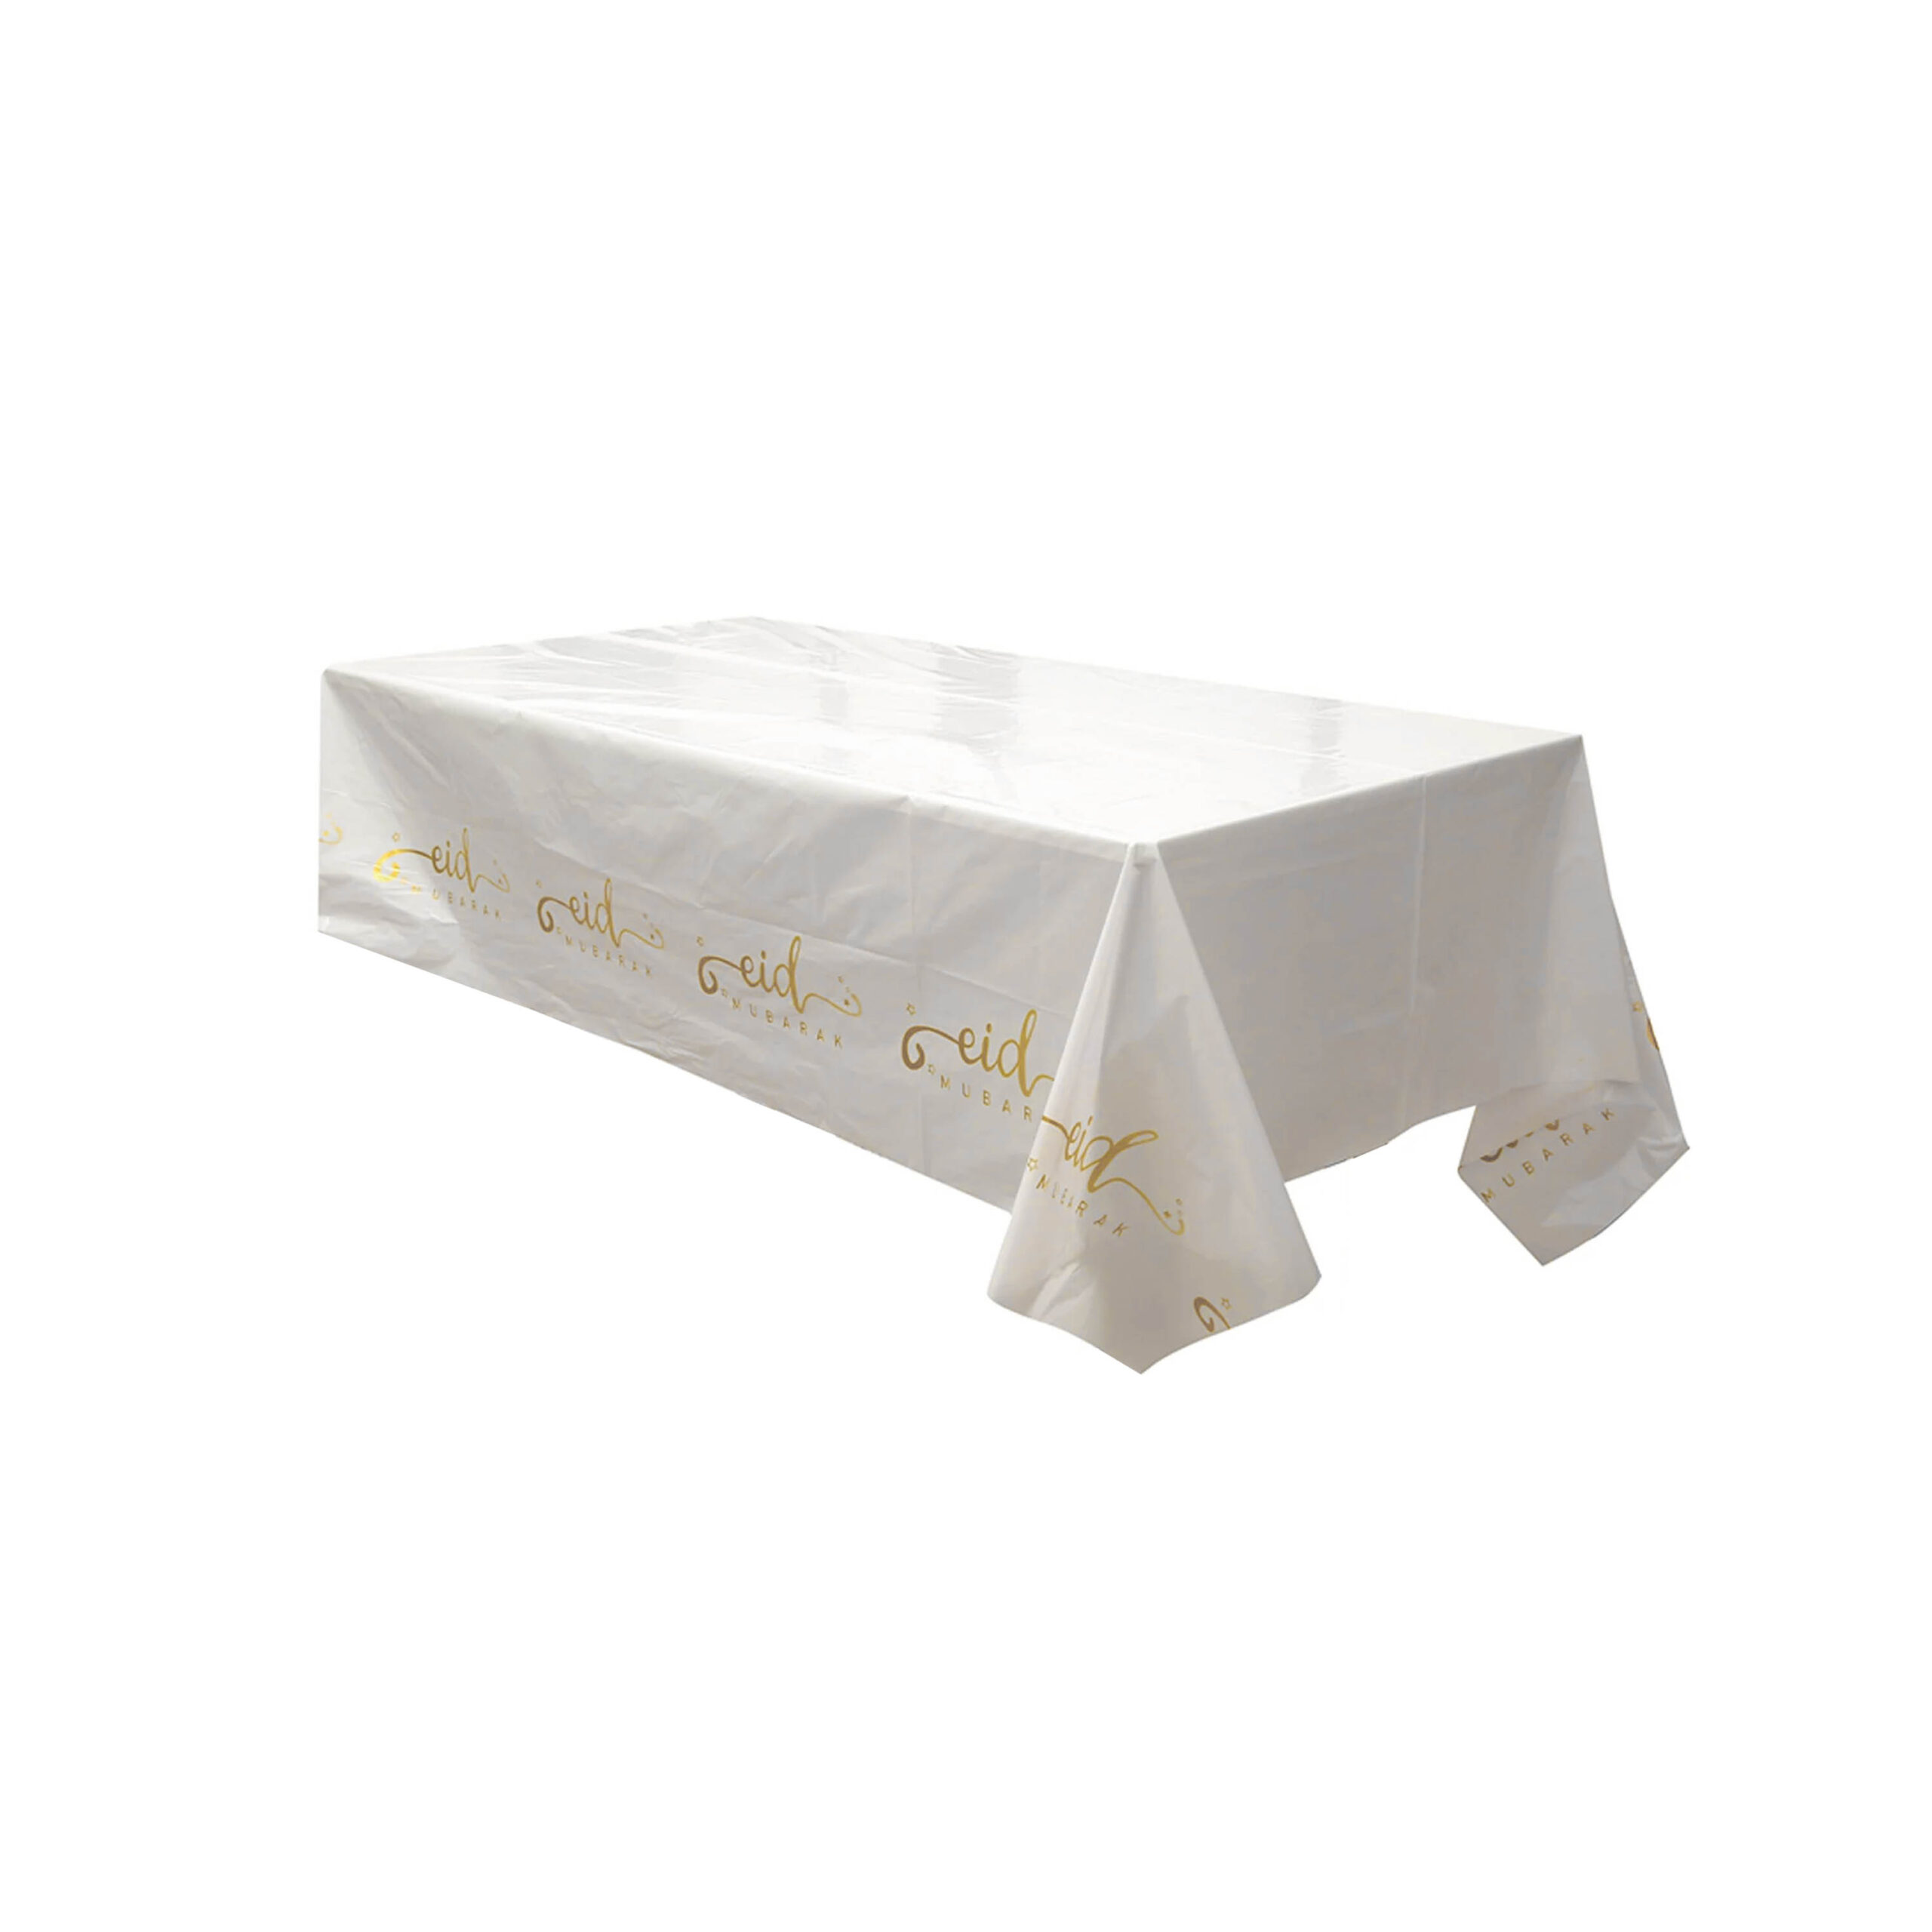 TABLE COVER EID
MUBARAK WHITE
WITH GOLD PRINT
130x220cm